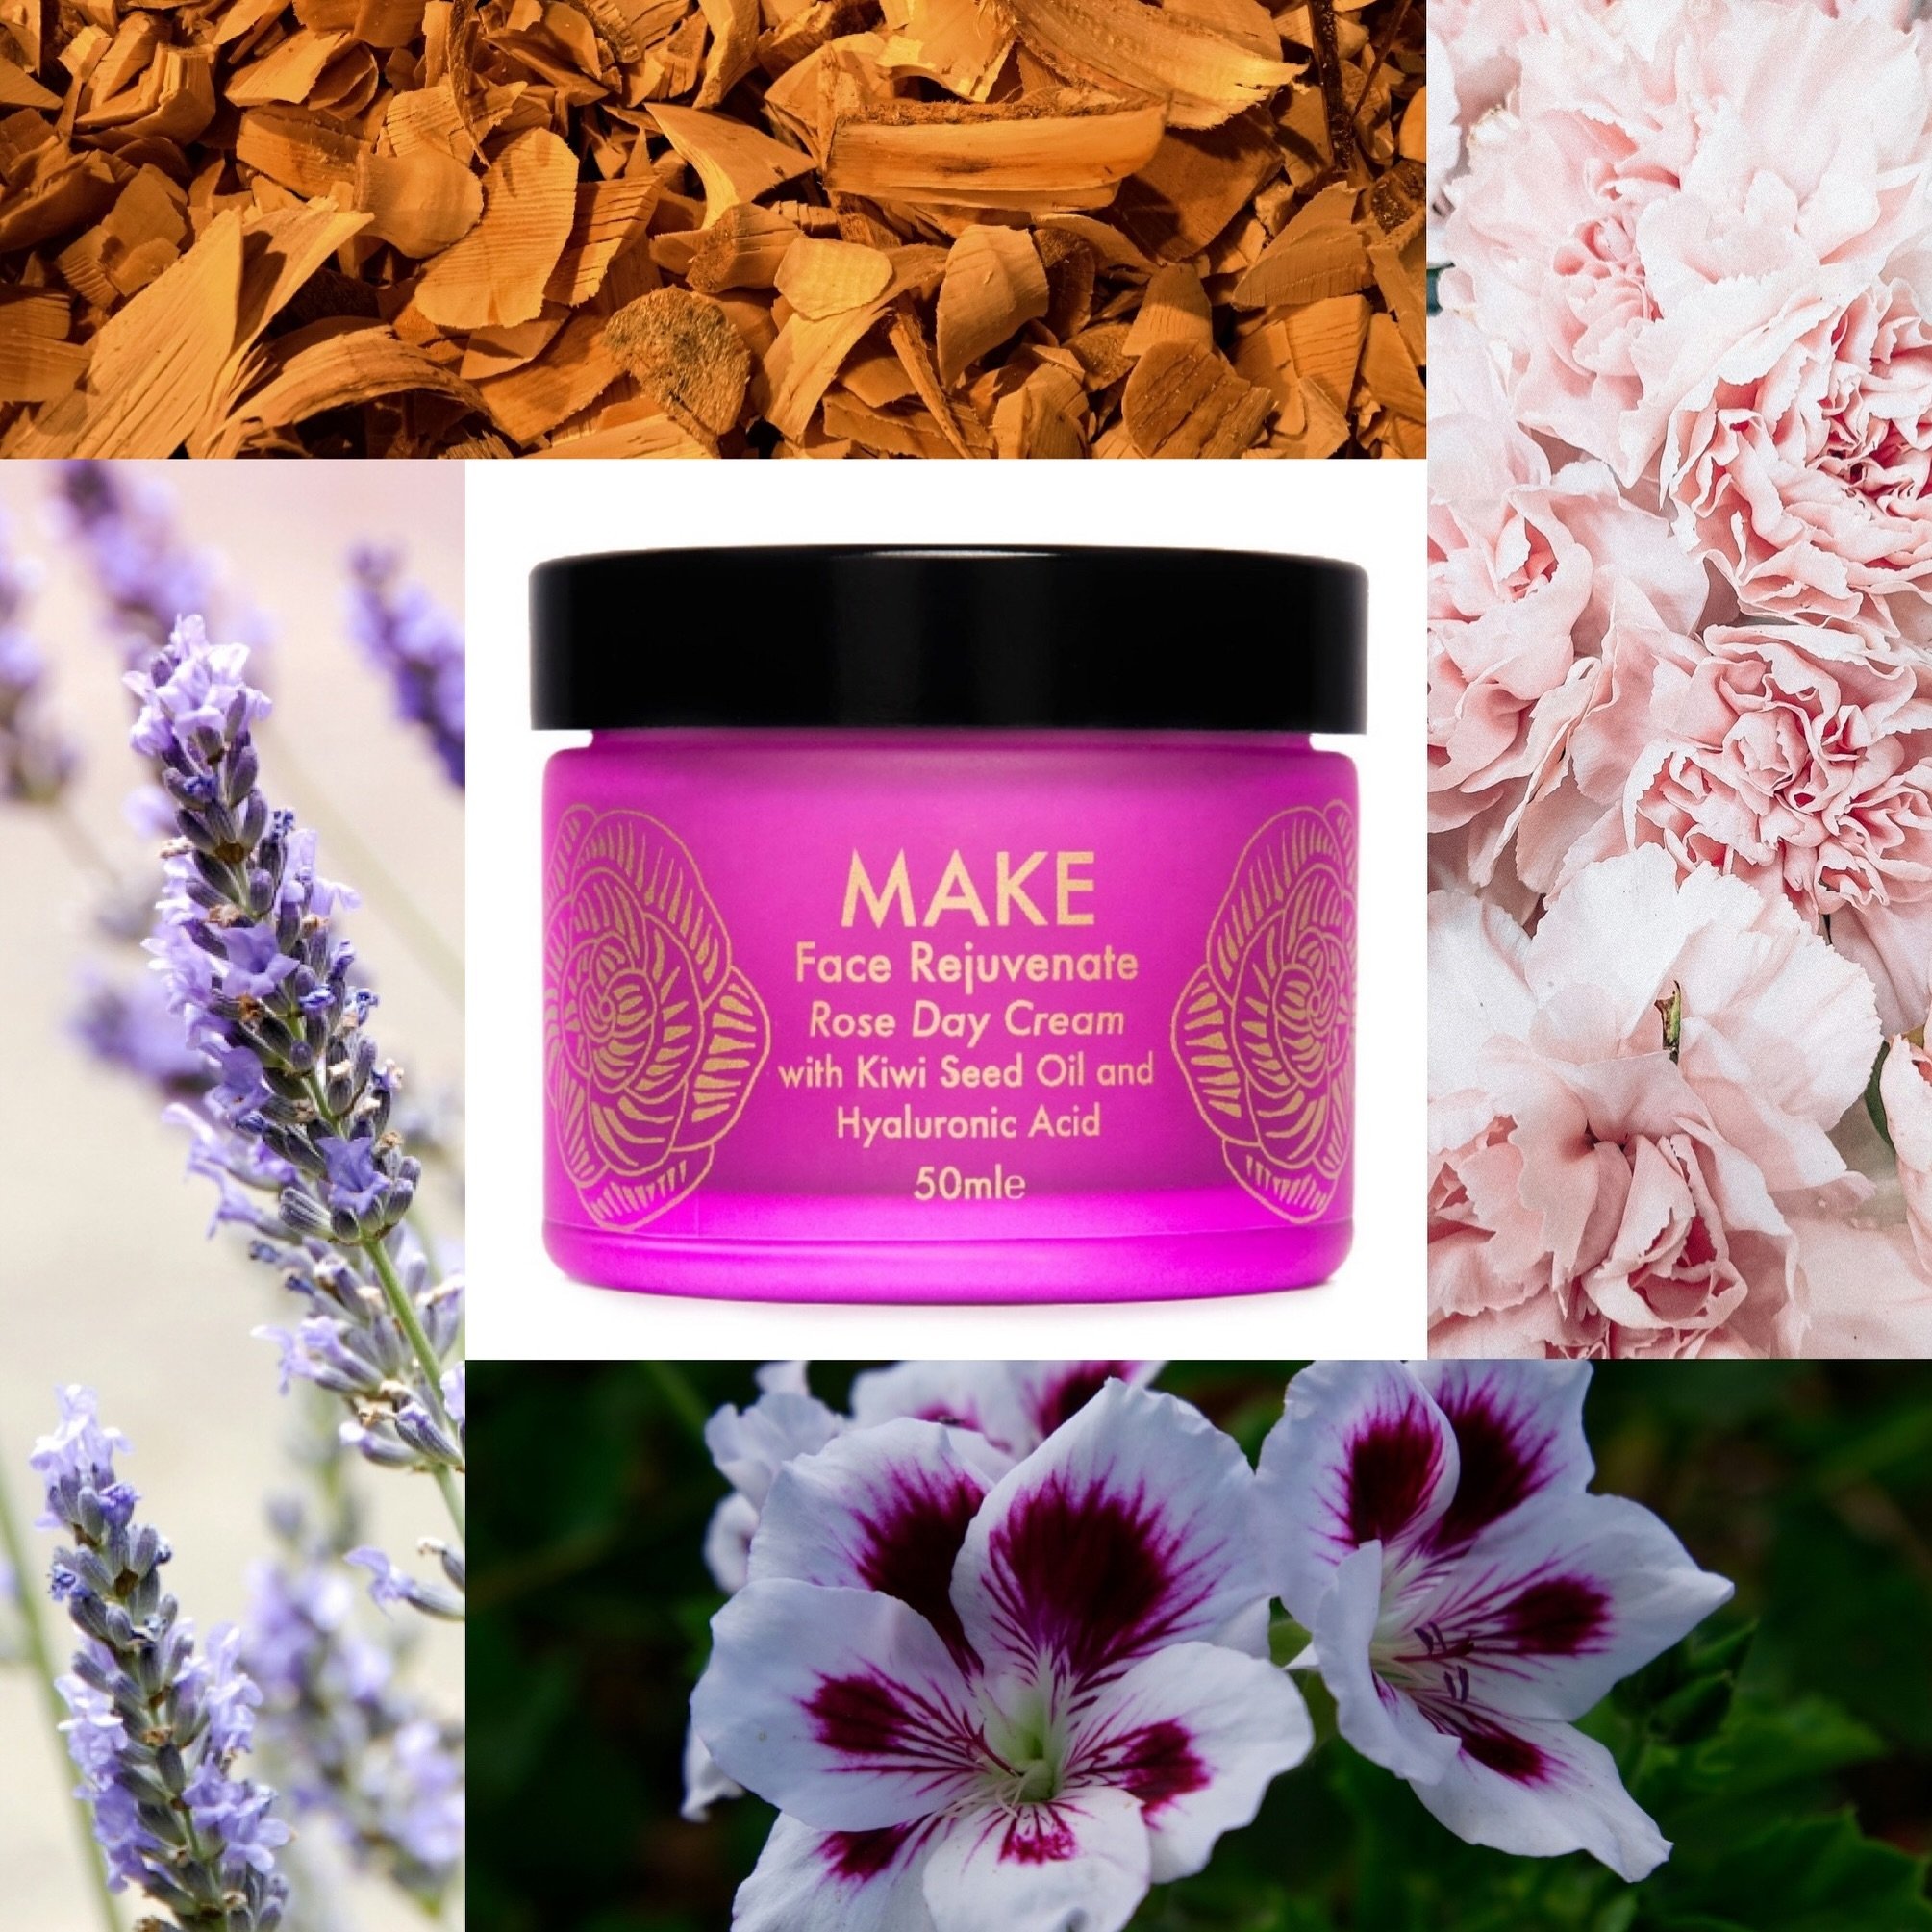 OFFER running until 5pm today! 

Face Rejuvenate , our rose otto , geranium, lavender and sandalwood face cream with hyaluronic acid , vitamin C and A , macadamia , apricot , kiwi seed and aloe vera . It&rsquo;s a lovely gentle , plumping moisturiser